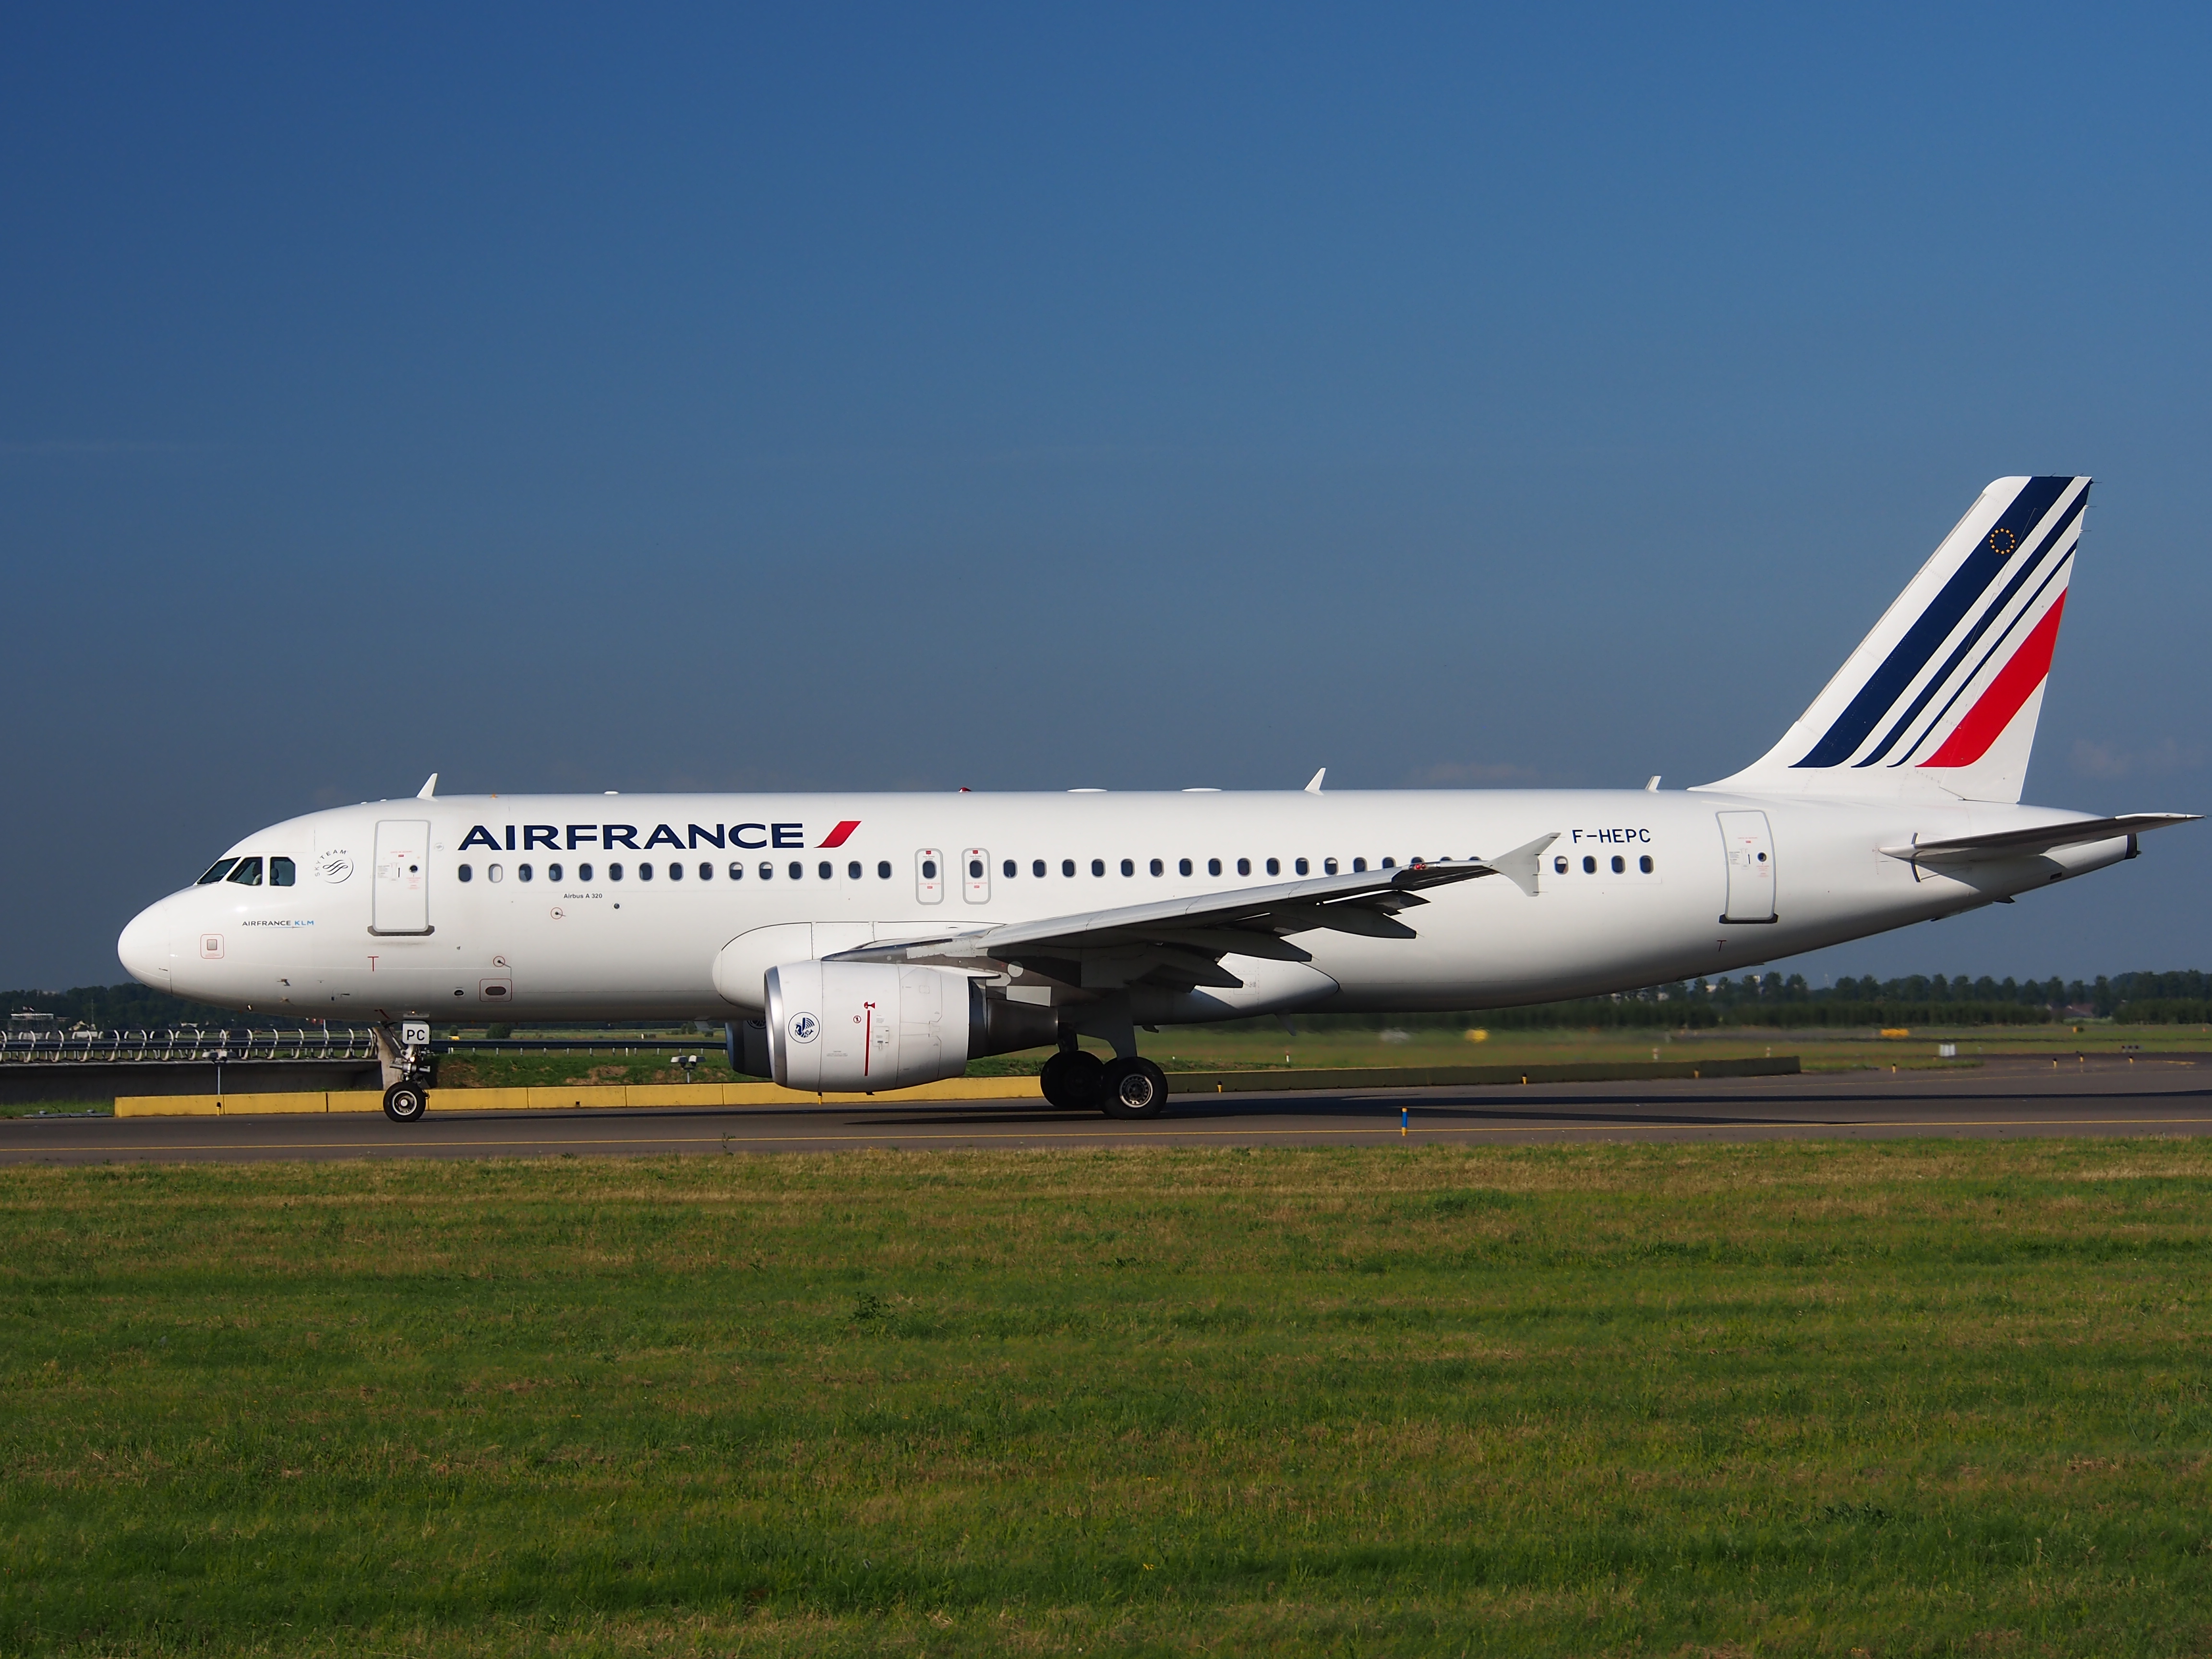 F-HEPC Air France Airbus A320-214 - cn 4267 taxiing 15july2013 pic-004